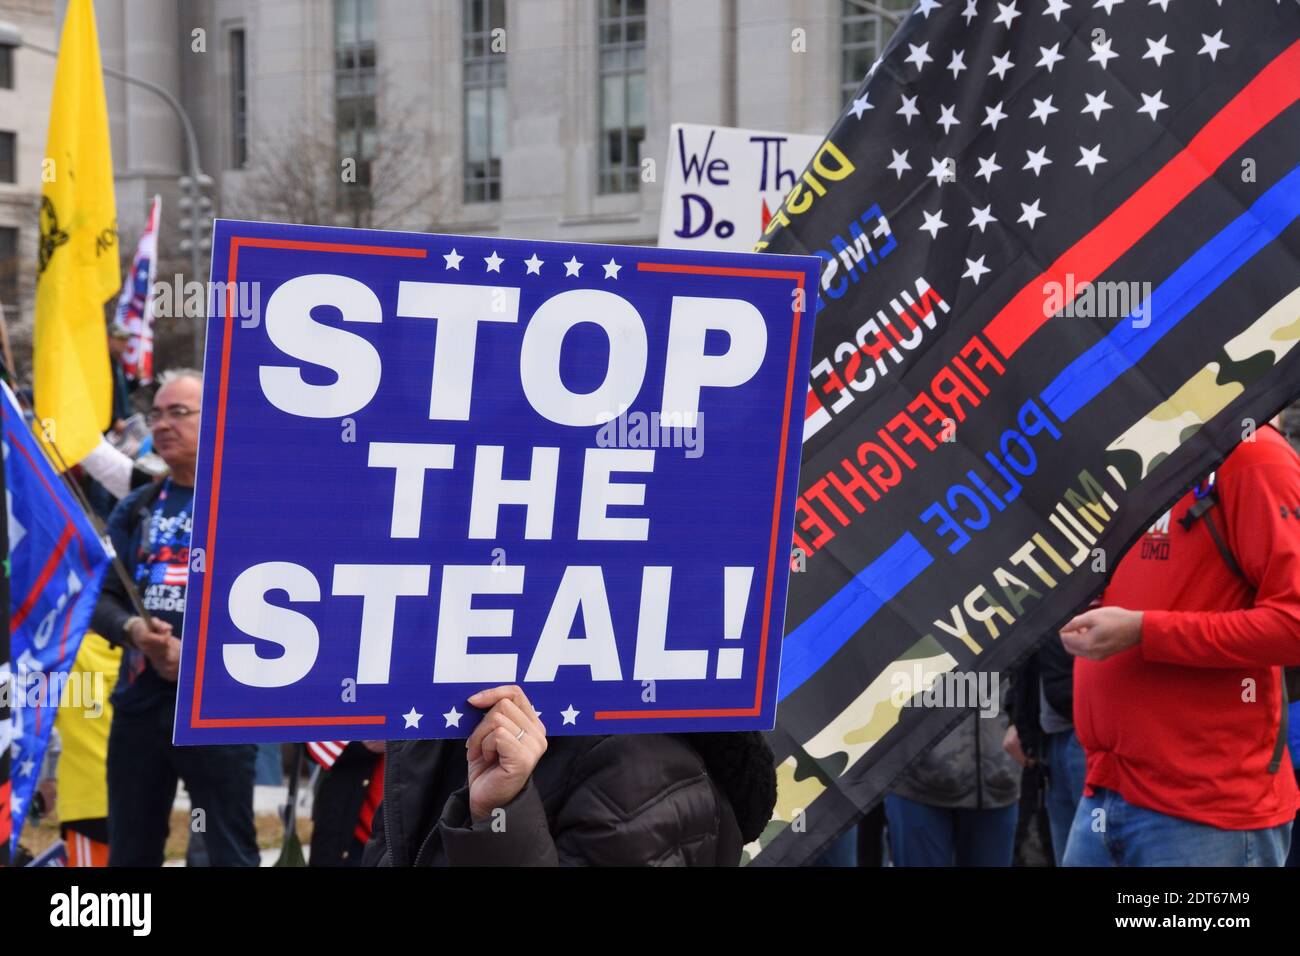 Washington DC. Dec 12, 2020. March for Trump to demand transparency and protect election integrity. Political sign ‘Stop the steal’ at Freedom plaza. Stock Photo